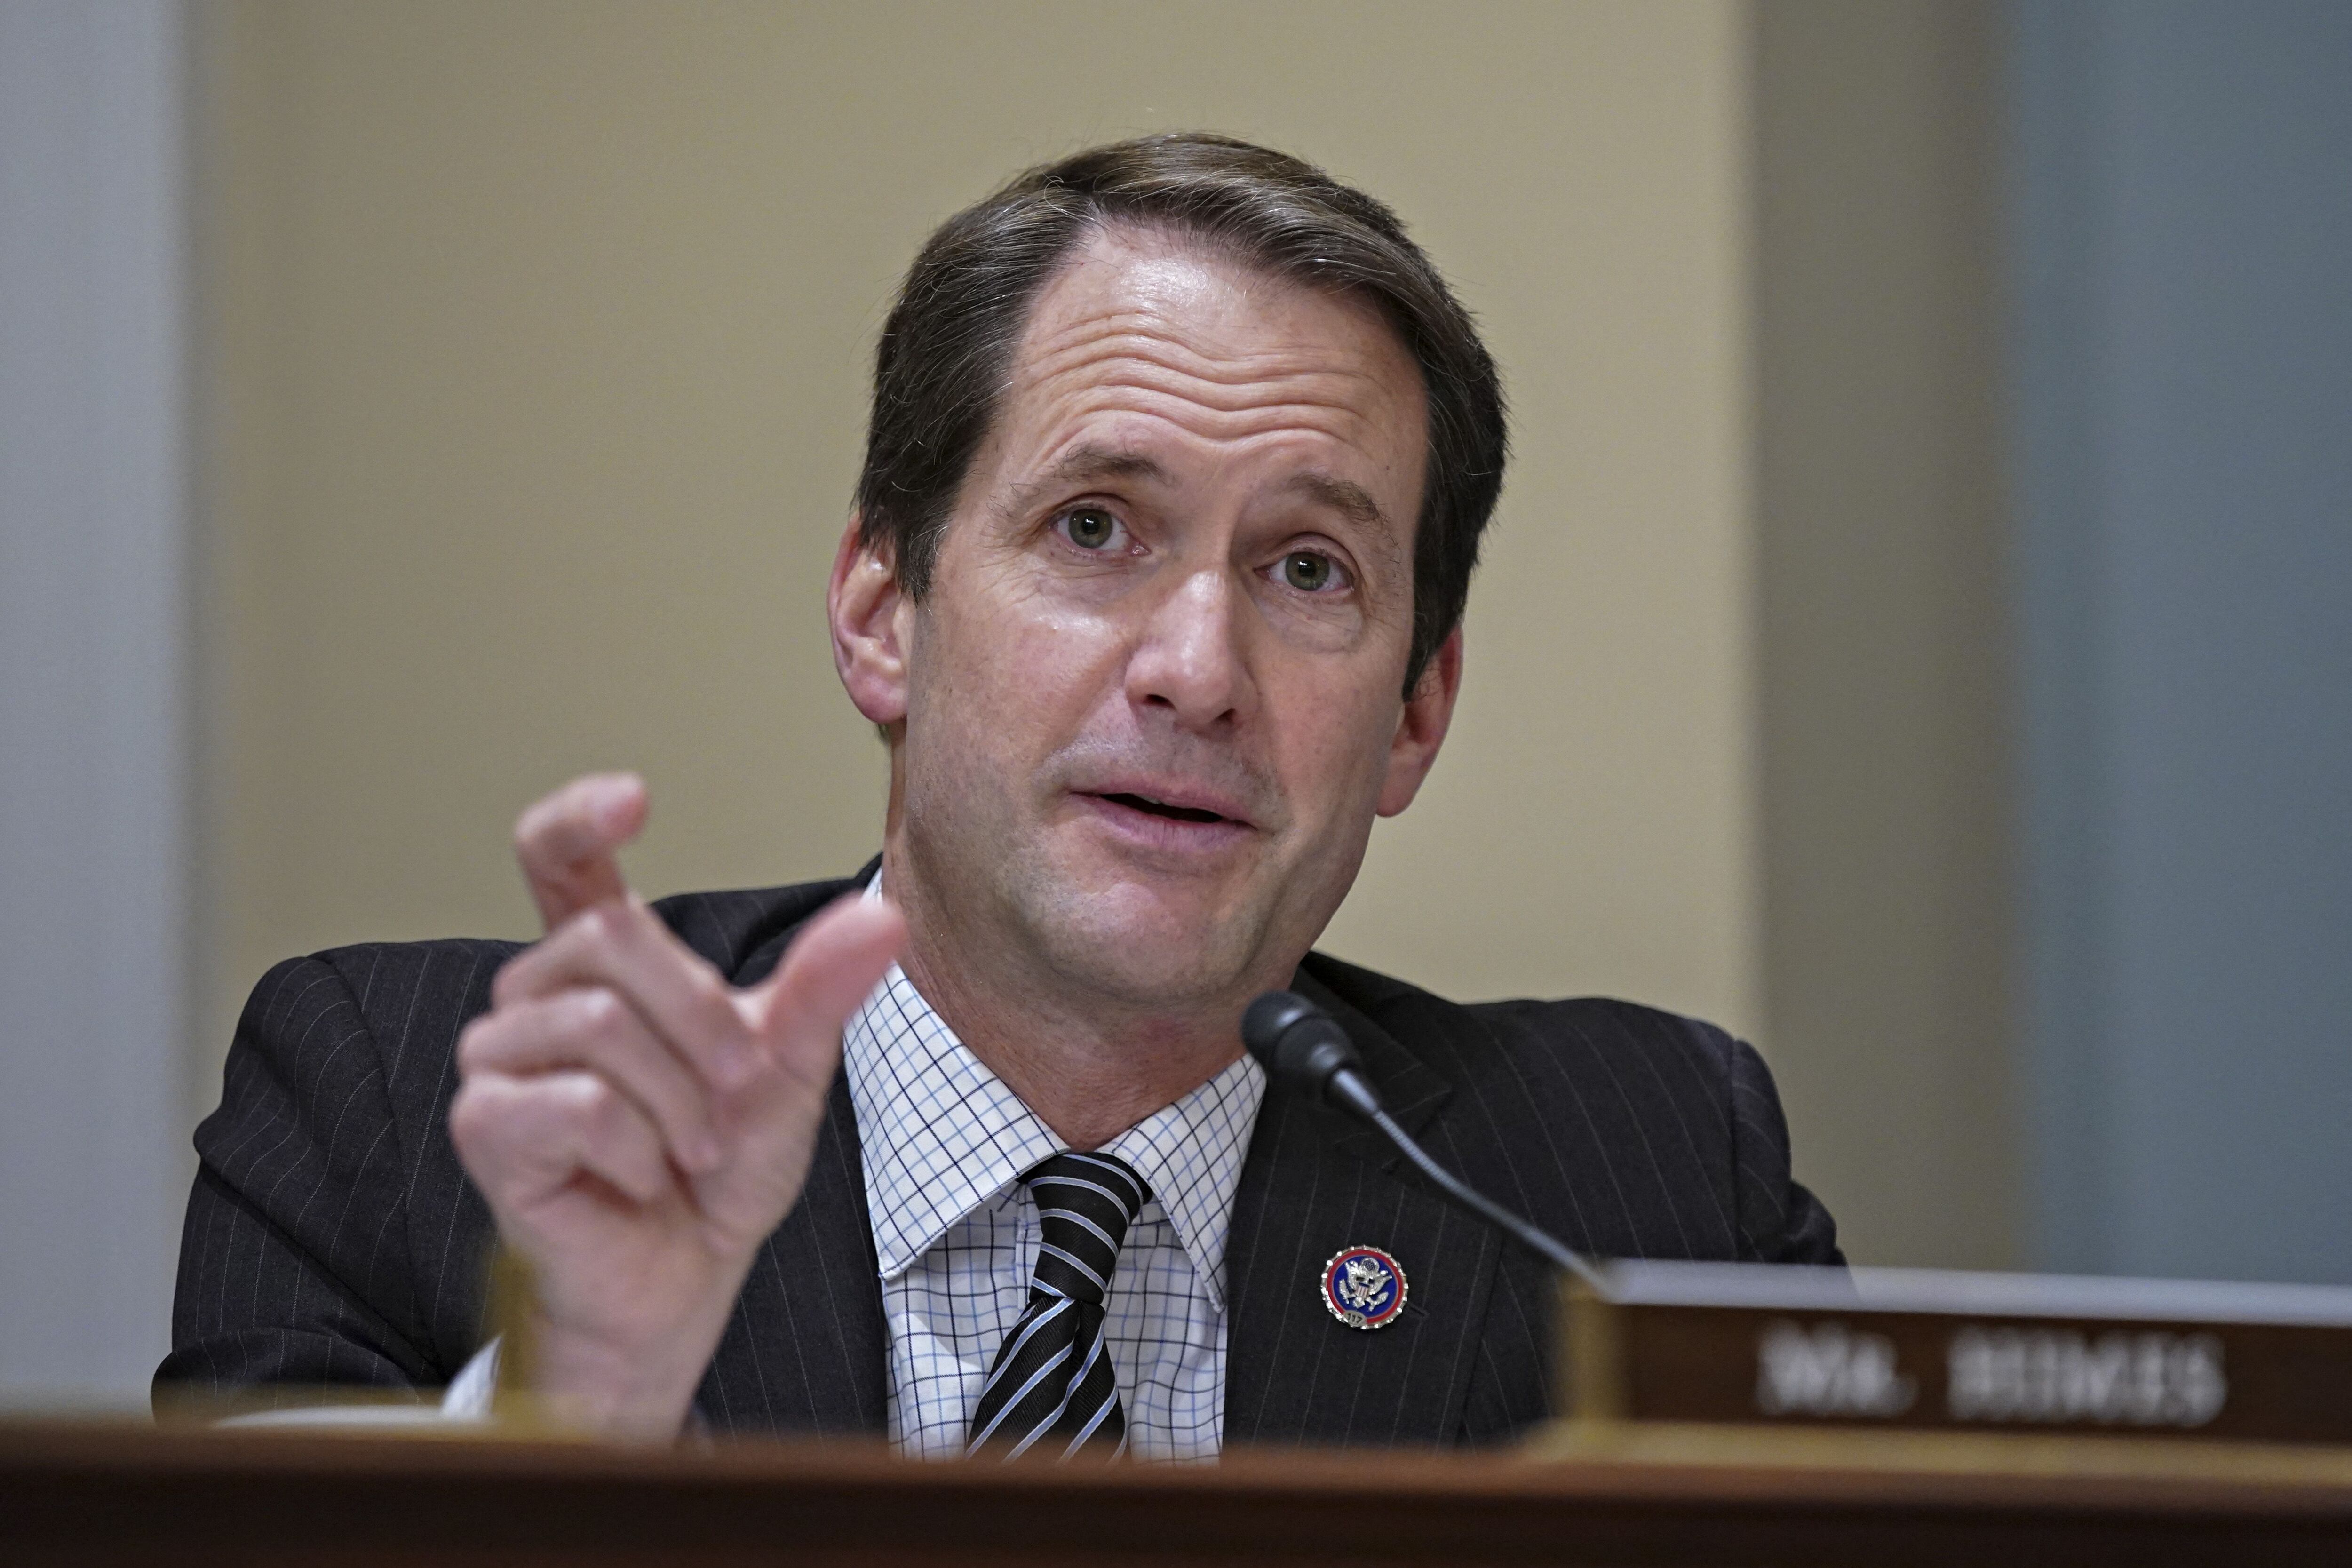 Rep. Jim Himes, D-Conn., speaks during a House Intelligence Committee hearing on April 15, 2021. (Photo by Al Drago/POOL/AFP).